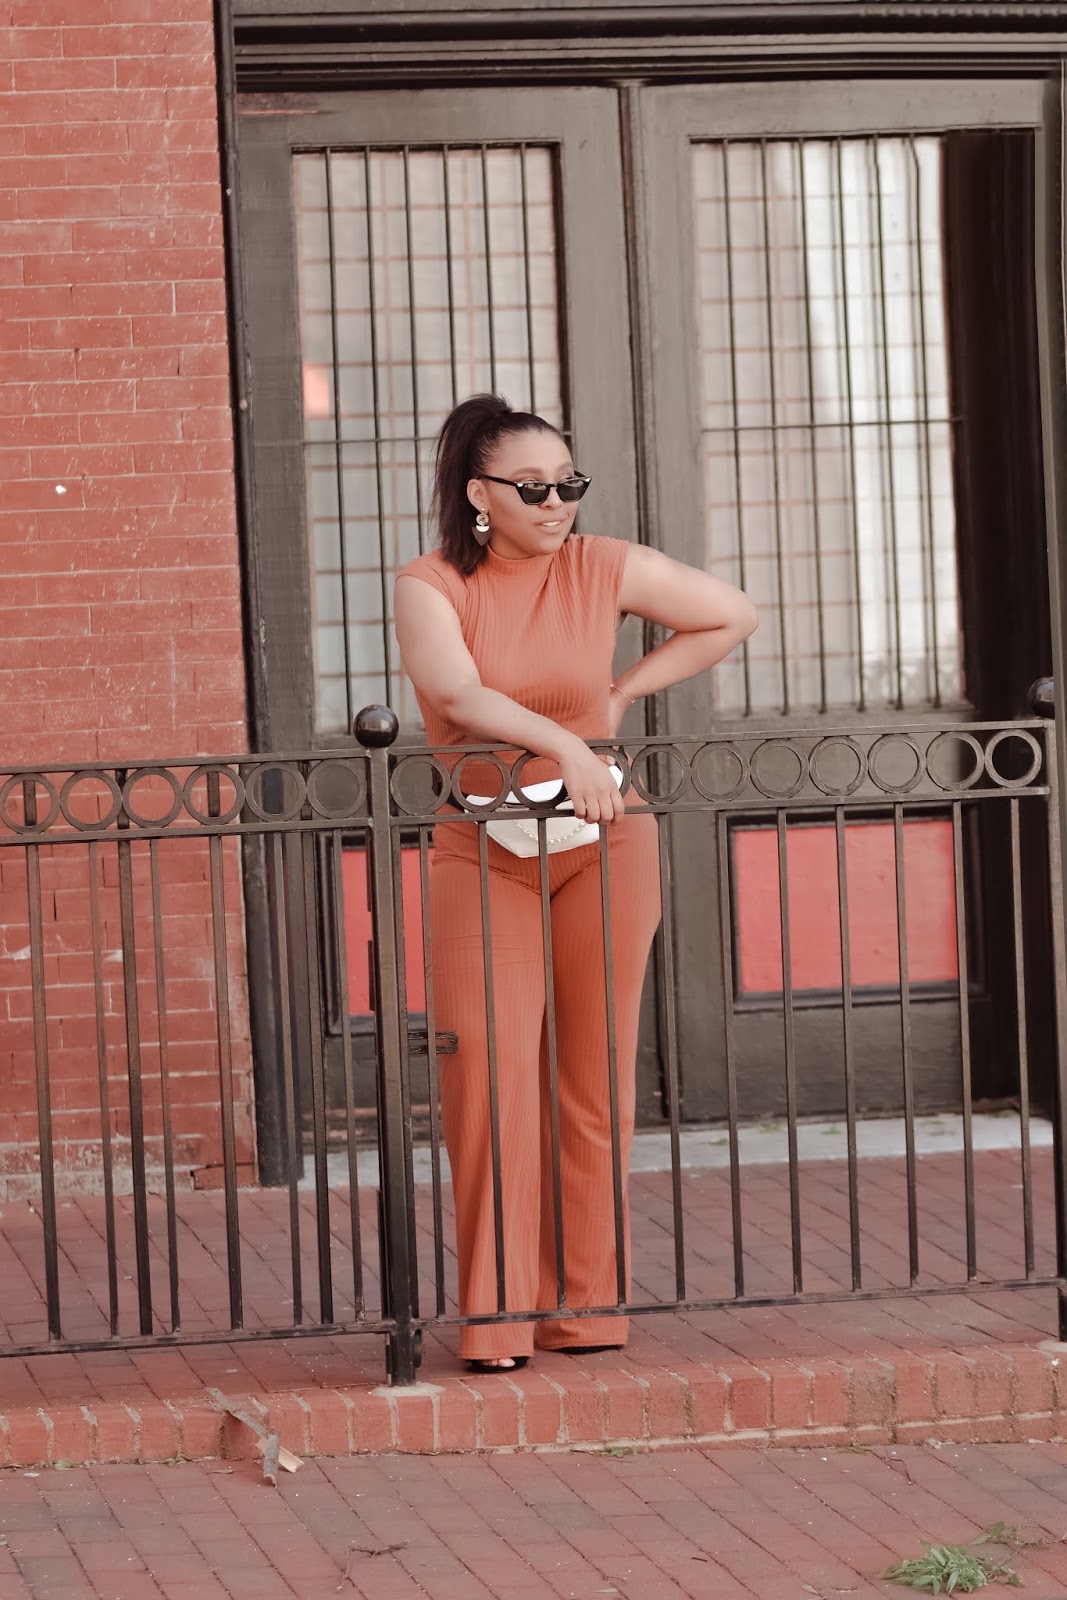 FemmeLuxe, jumpsuit, remix outfit, Coral jumpsuit, one piece, romper, streetstyle, stylish mom bloggers, summer outfit ideas, fanny pack trend